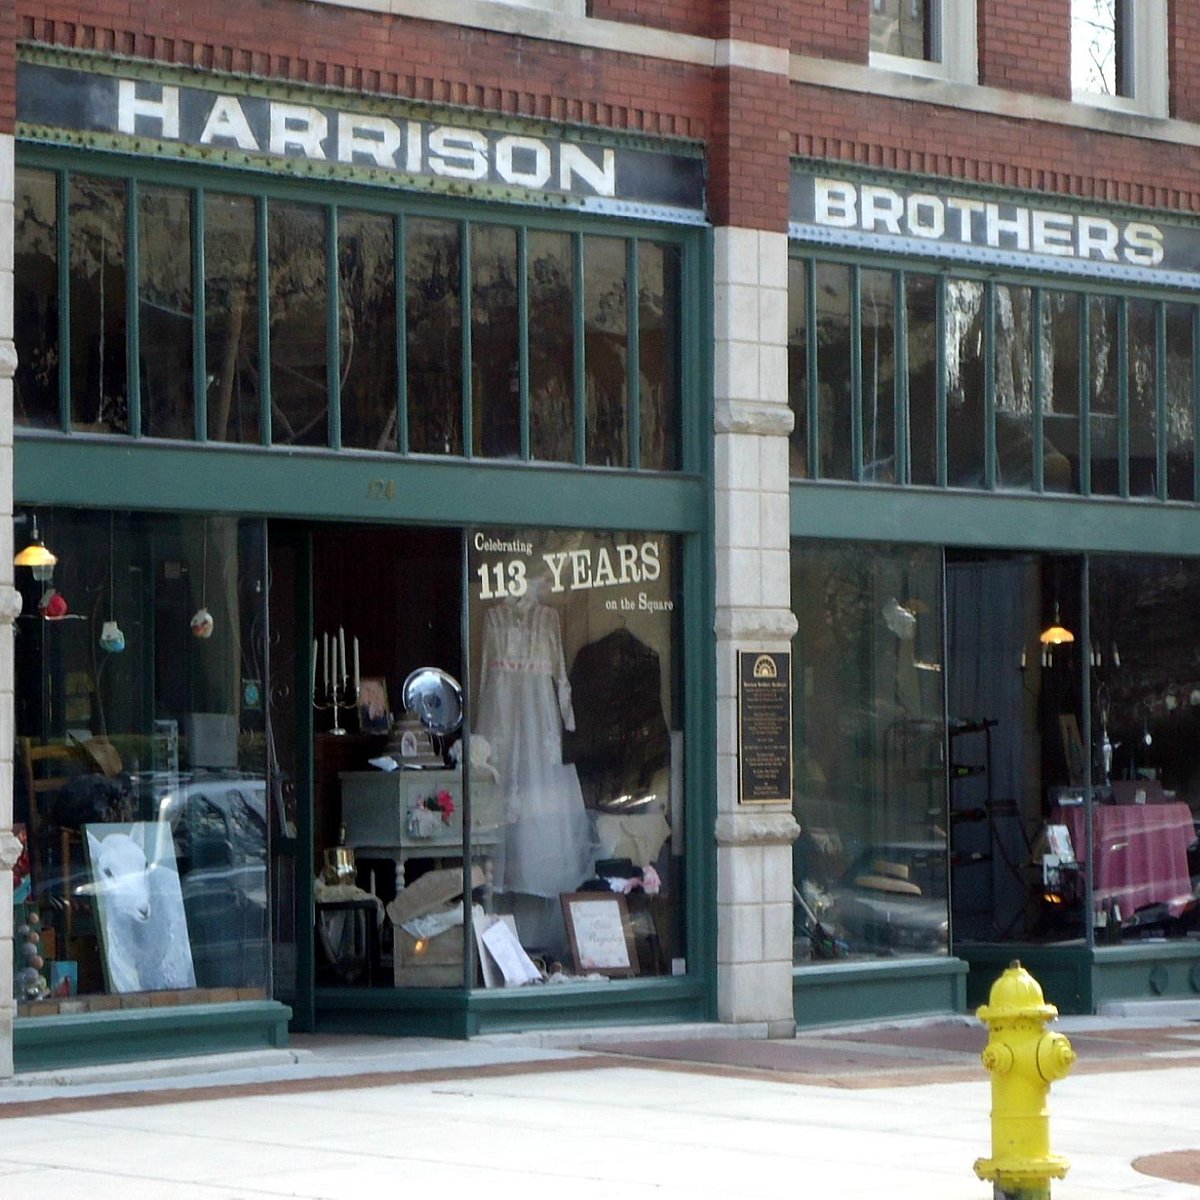 NEW LODGE items in stock. - Harrison Brothers Hardware